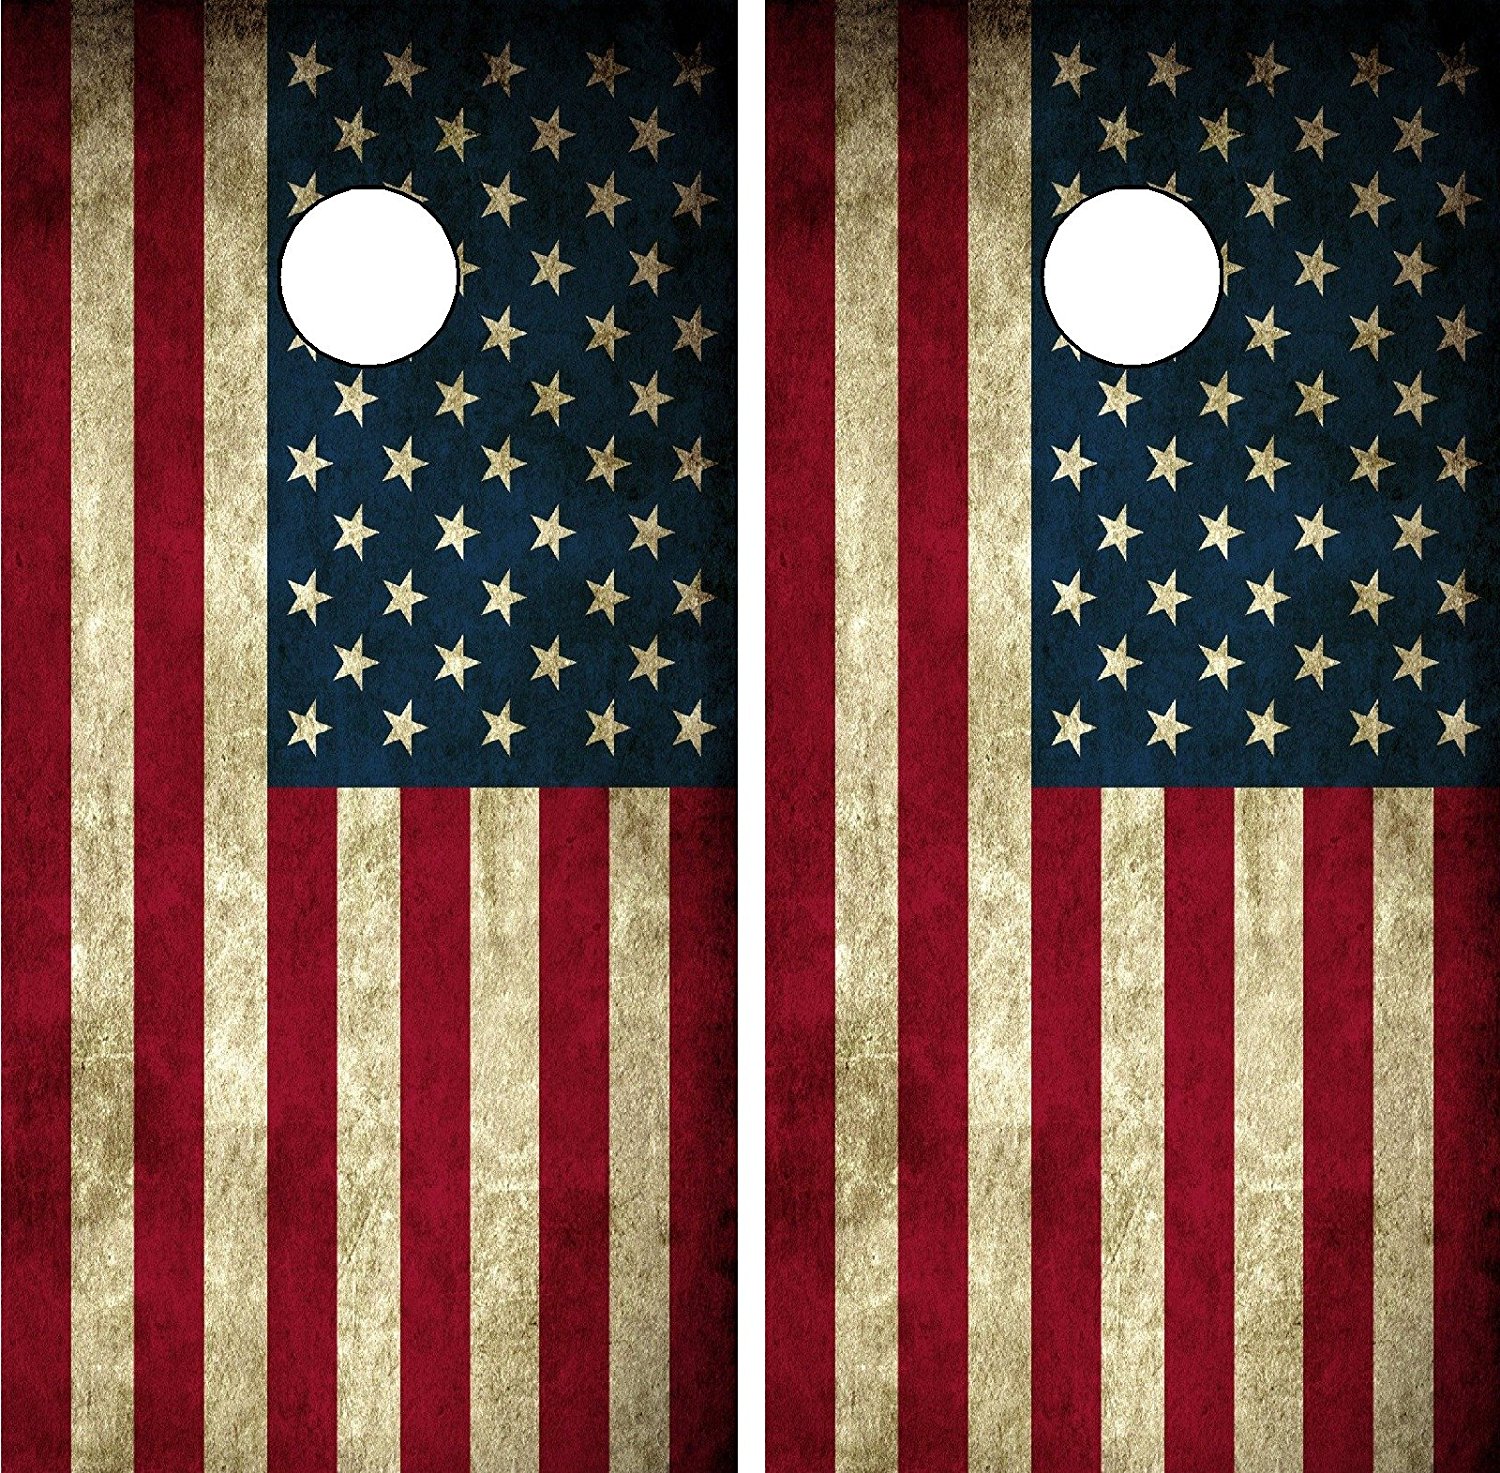 Do your cornholin' like a true red blooded American patriot with these USA Flag Cornhole boards! Get it <a href="https://amzn.to/2KRTE1C" target="_blank"><font color="red"><b>HERE</font></b></a>